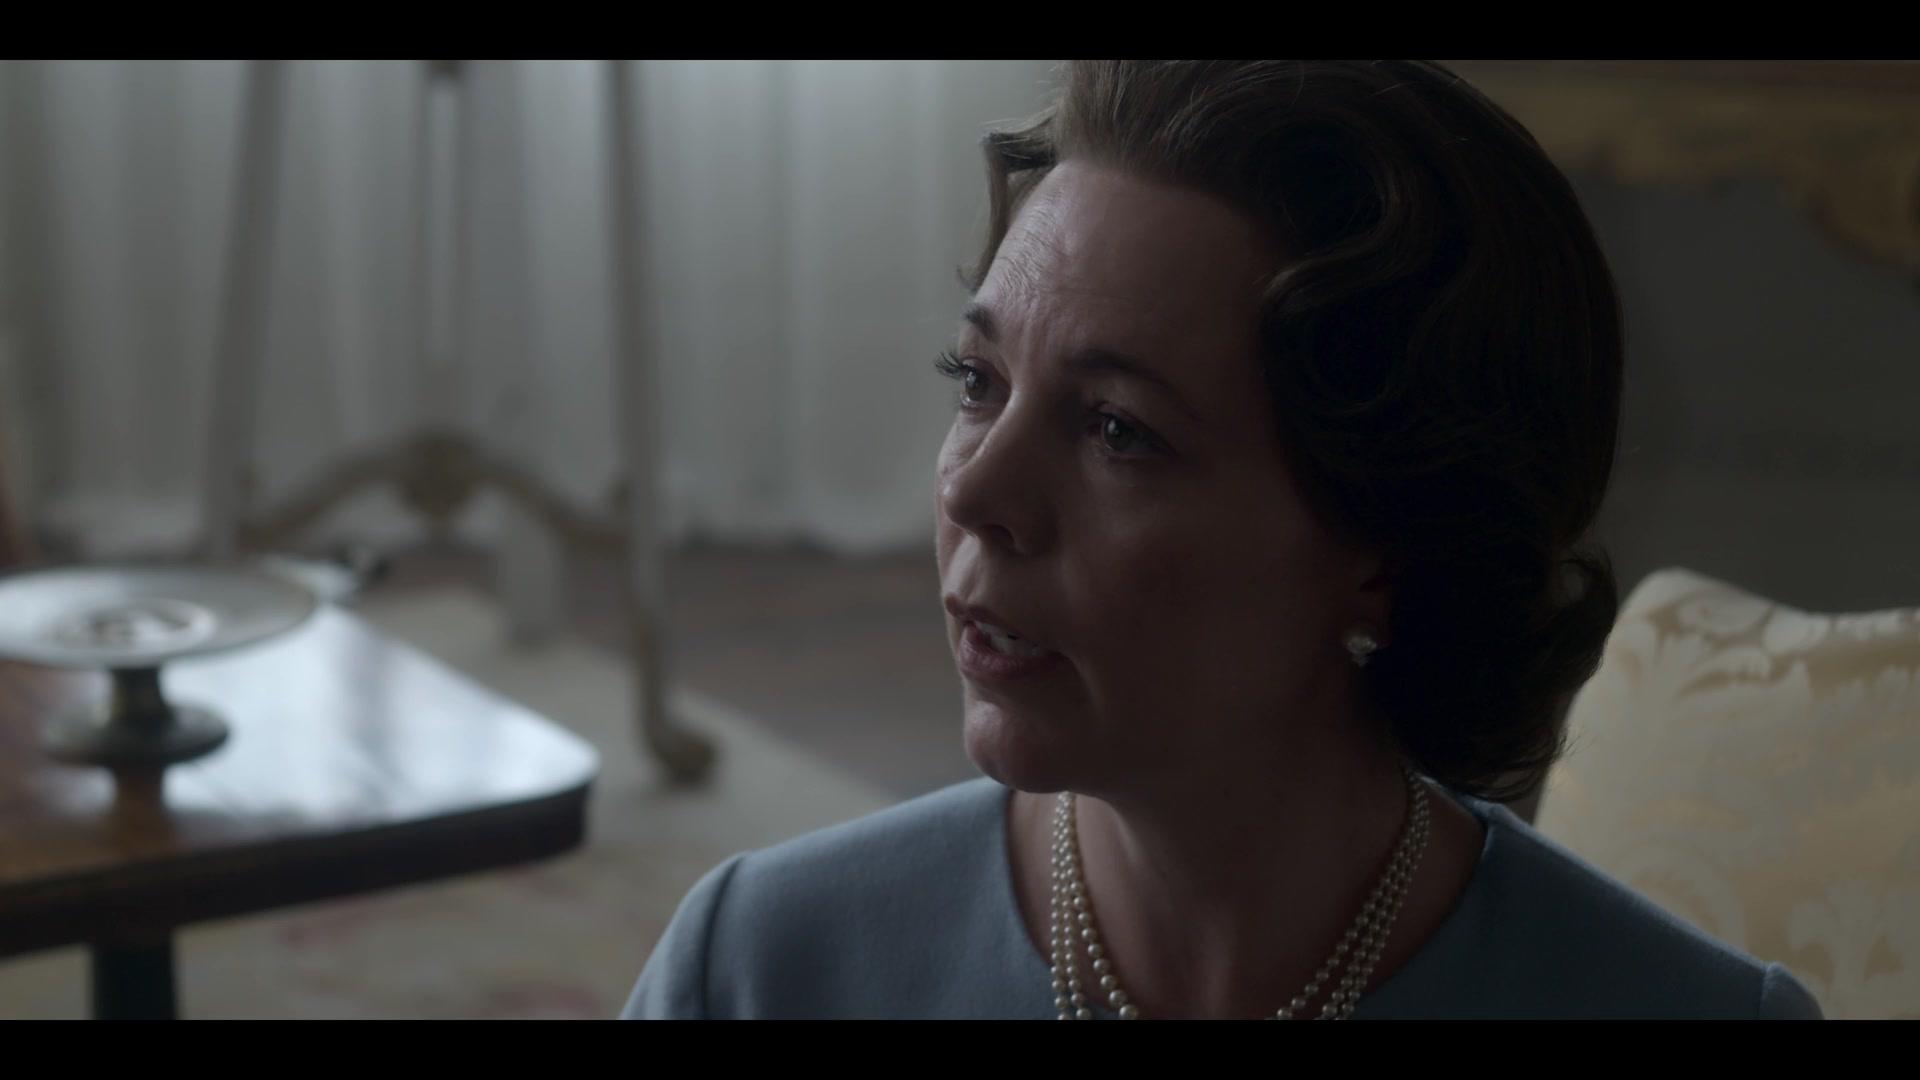 The Crown S03